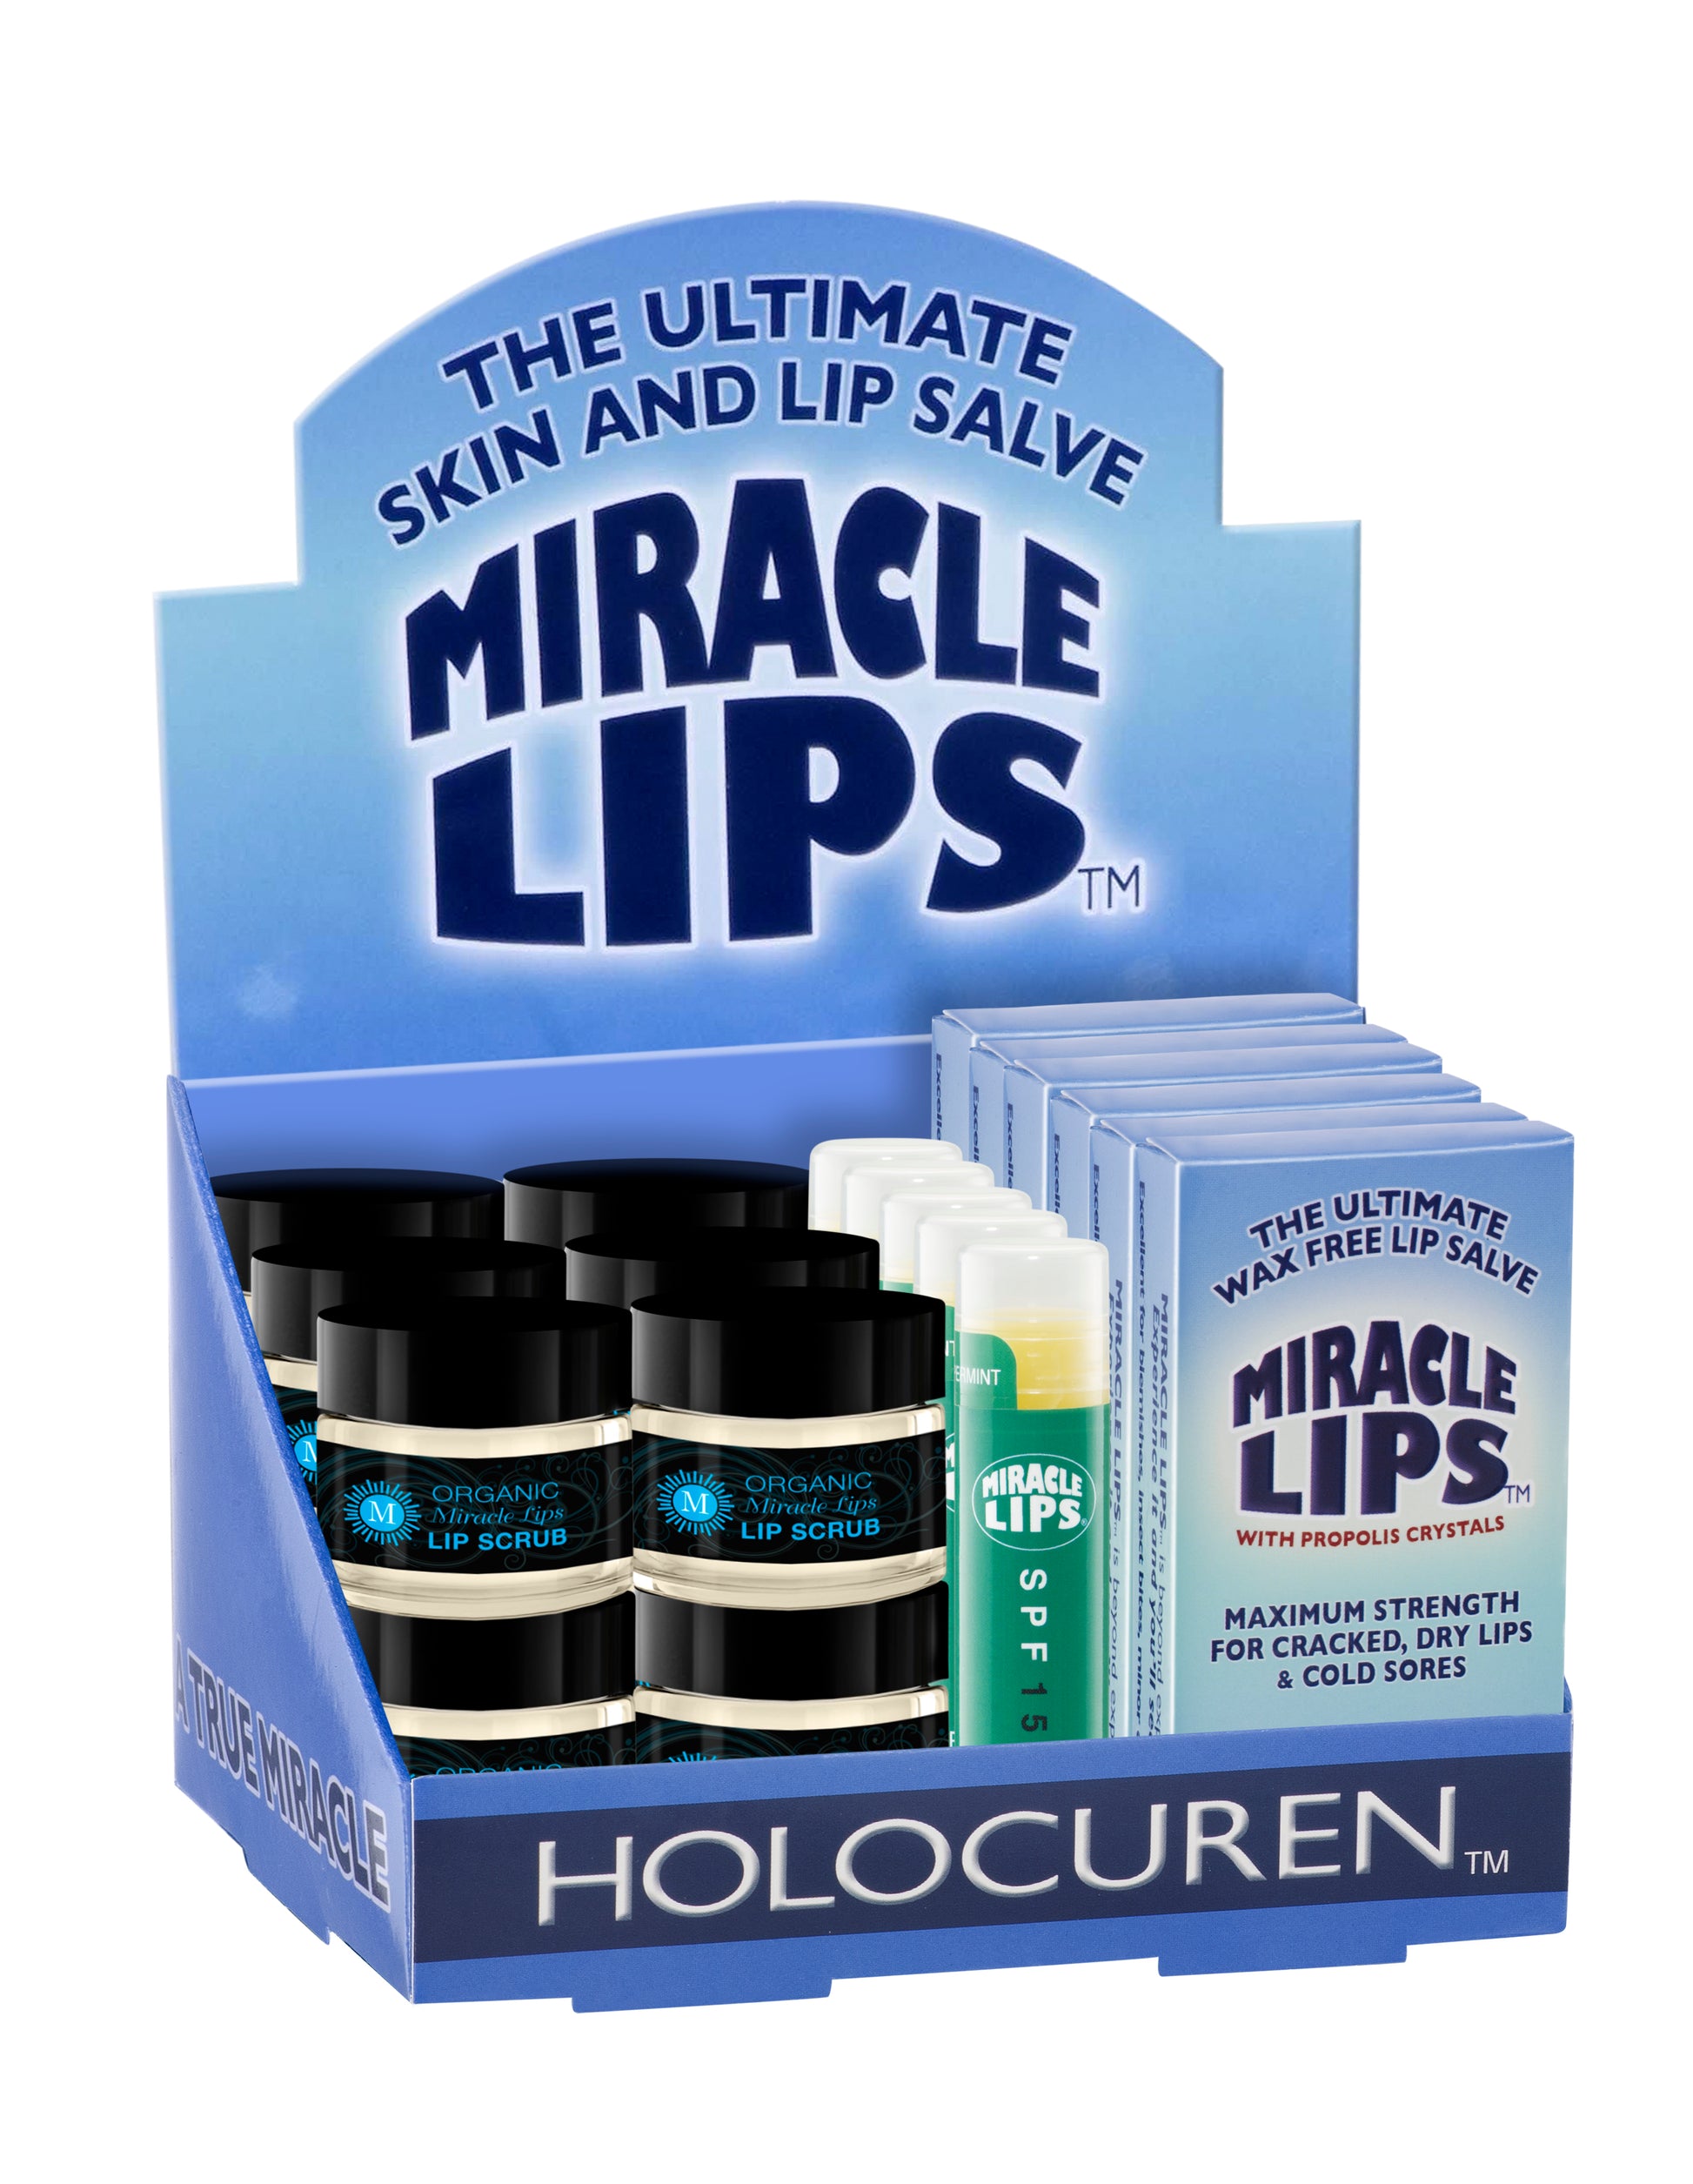 Miracle Lips Organic 2 in 1 Lip Scrub and Balm PLUS Miracle Lips SPF 15 Balm - HOLOCUREN - Official Website